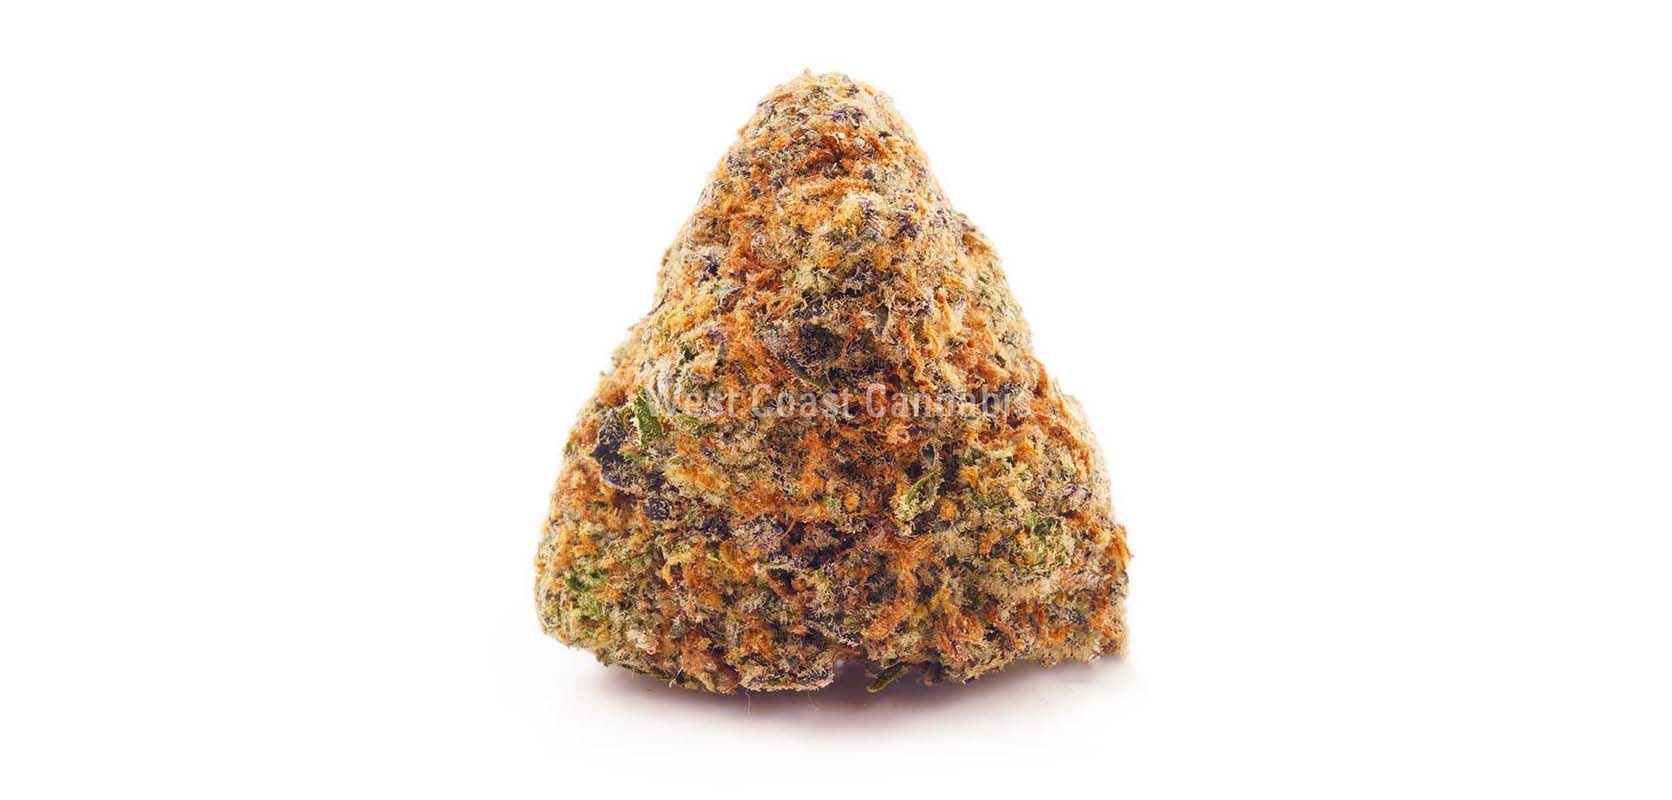 Slurricane value buds for sale from weed dispensary for BC cannabis. cannabis stores. weed delivery canada. weed online. dispenseries.